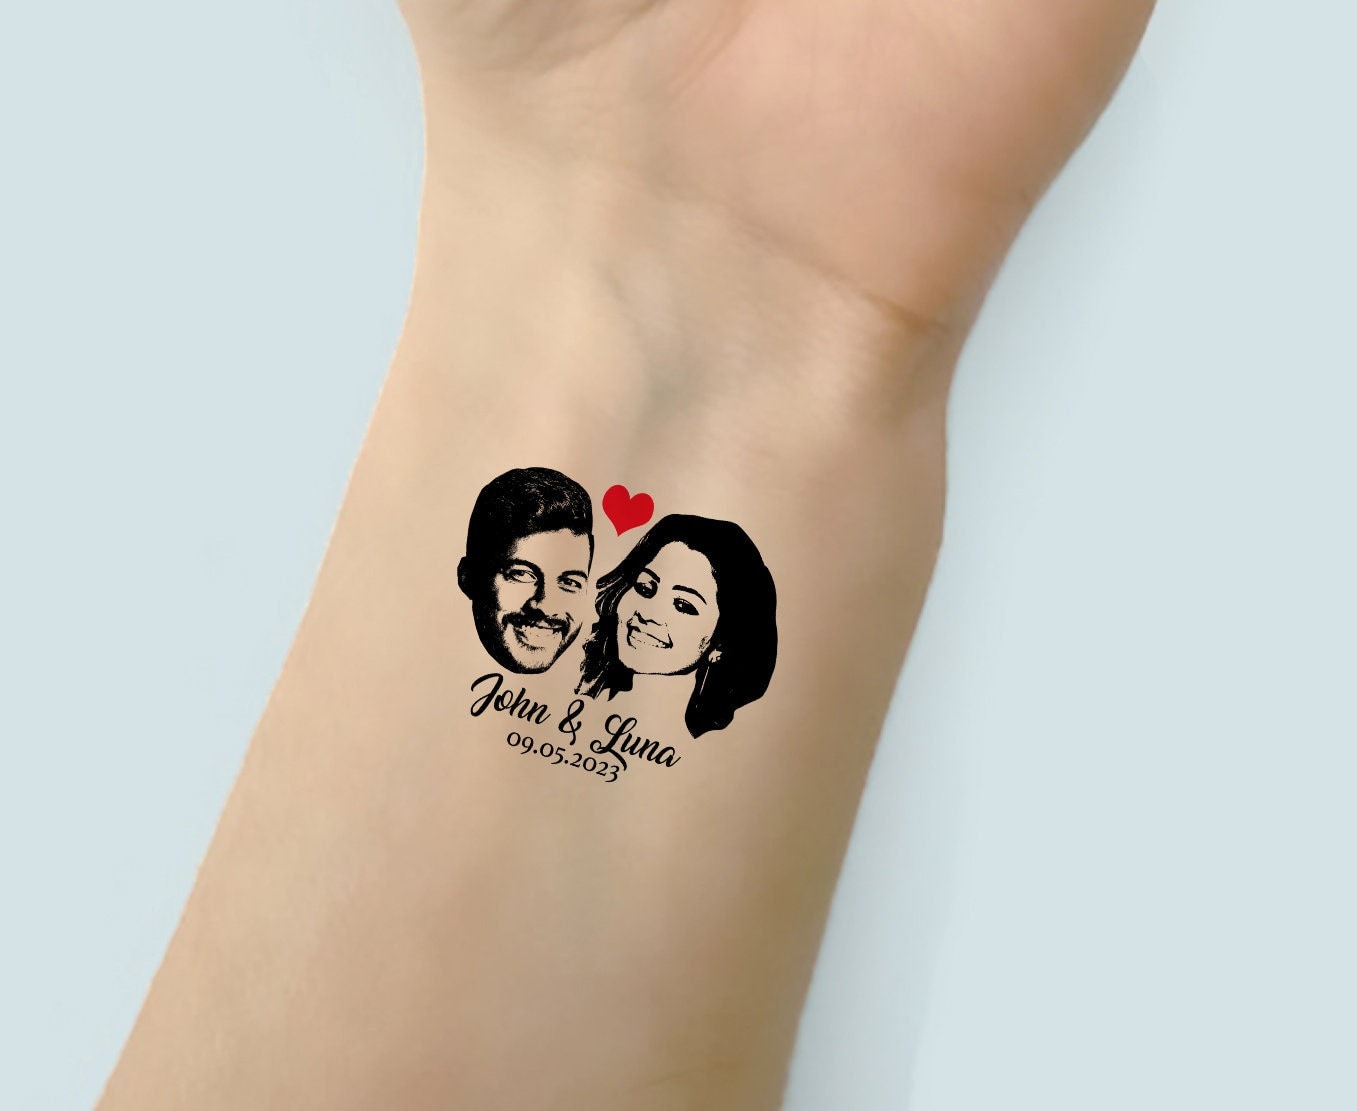 Amazon.com : Custom Tattoos Personalized Temporary Tattoos with Photo Face  Name Heart for Birthday Party Wedding Bride Groom Gift : Beauty & Personal  Care